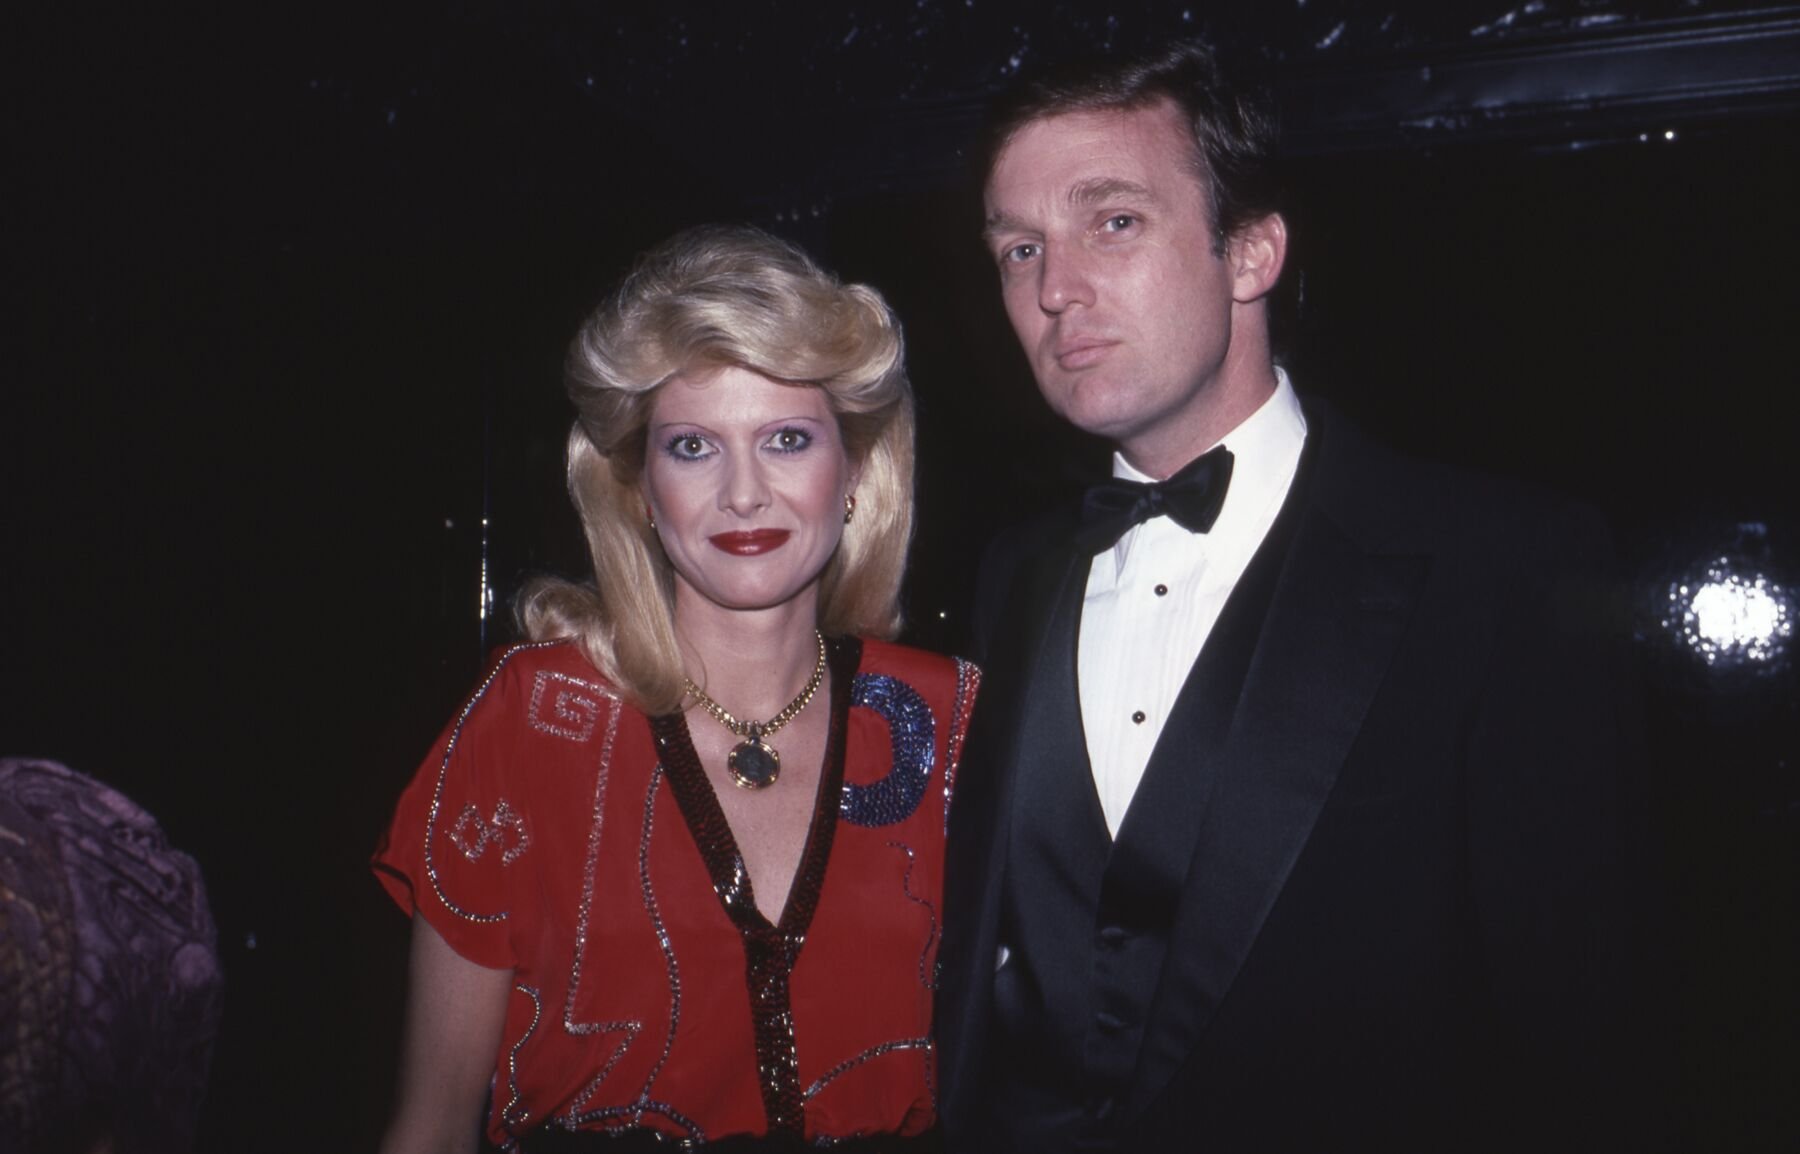 Ivana and Donald Trump at a New York social event, cieca 1985 | Source: Getty Images